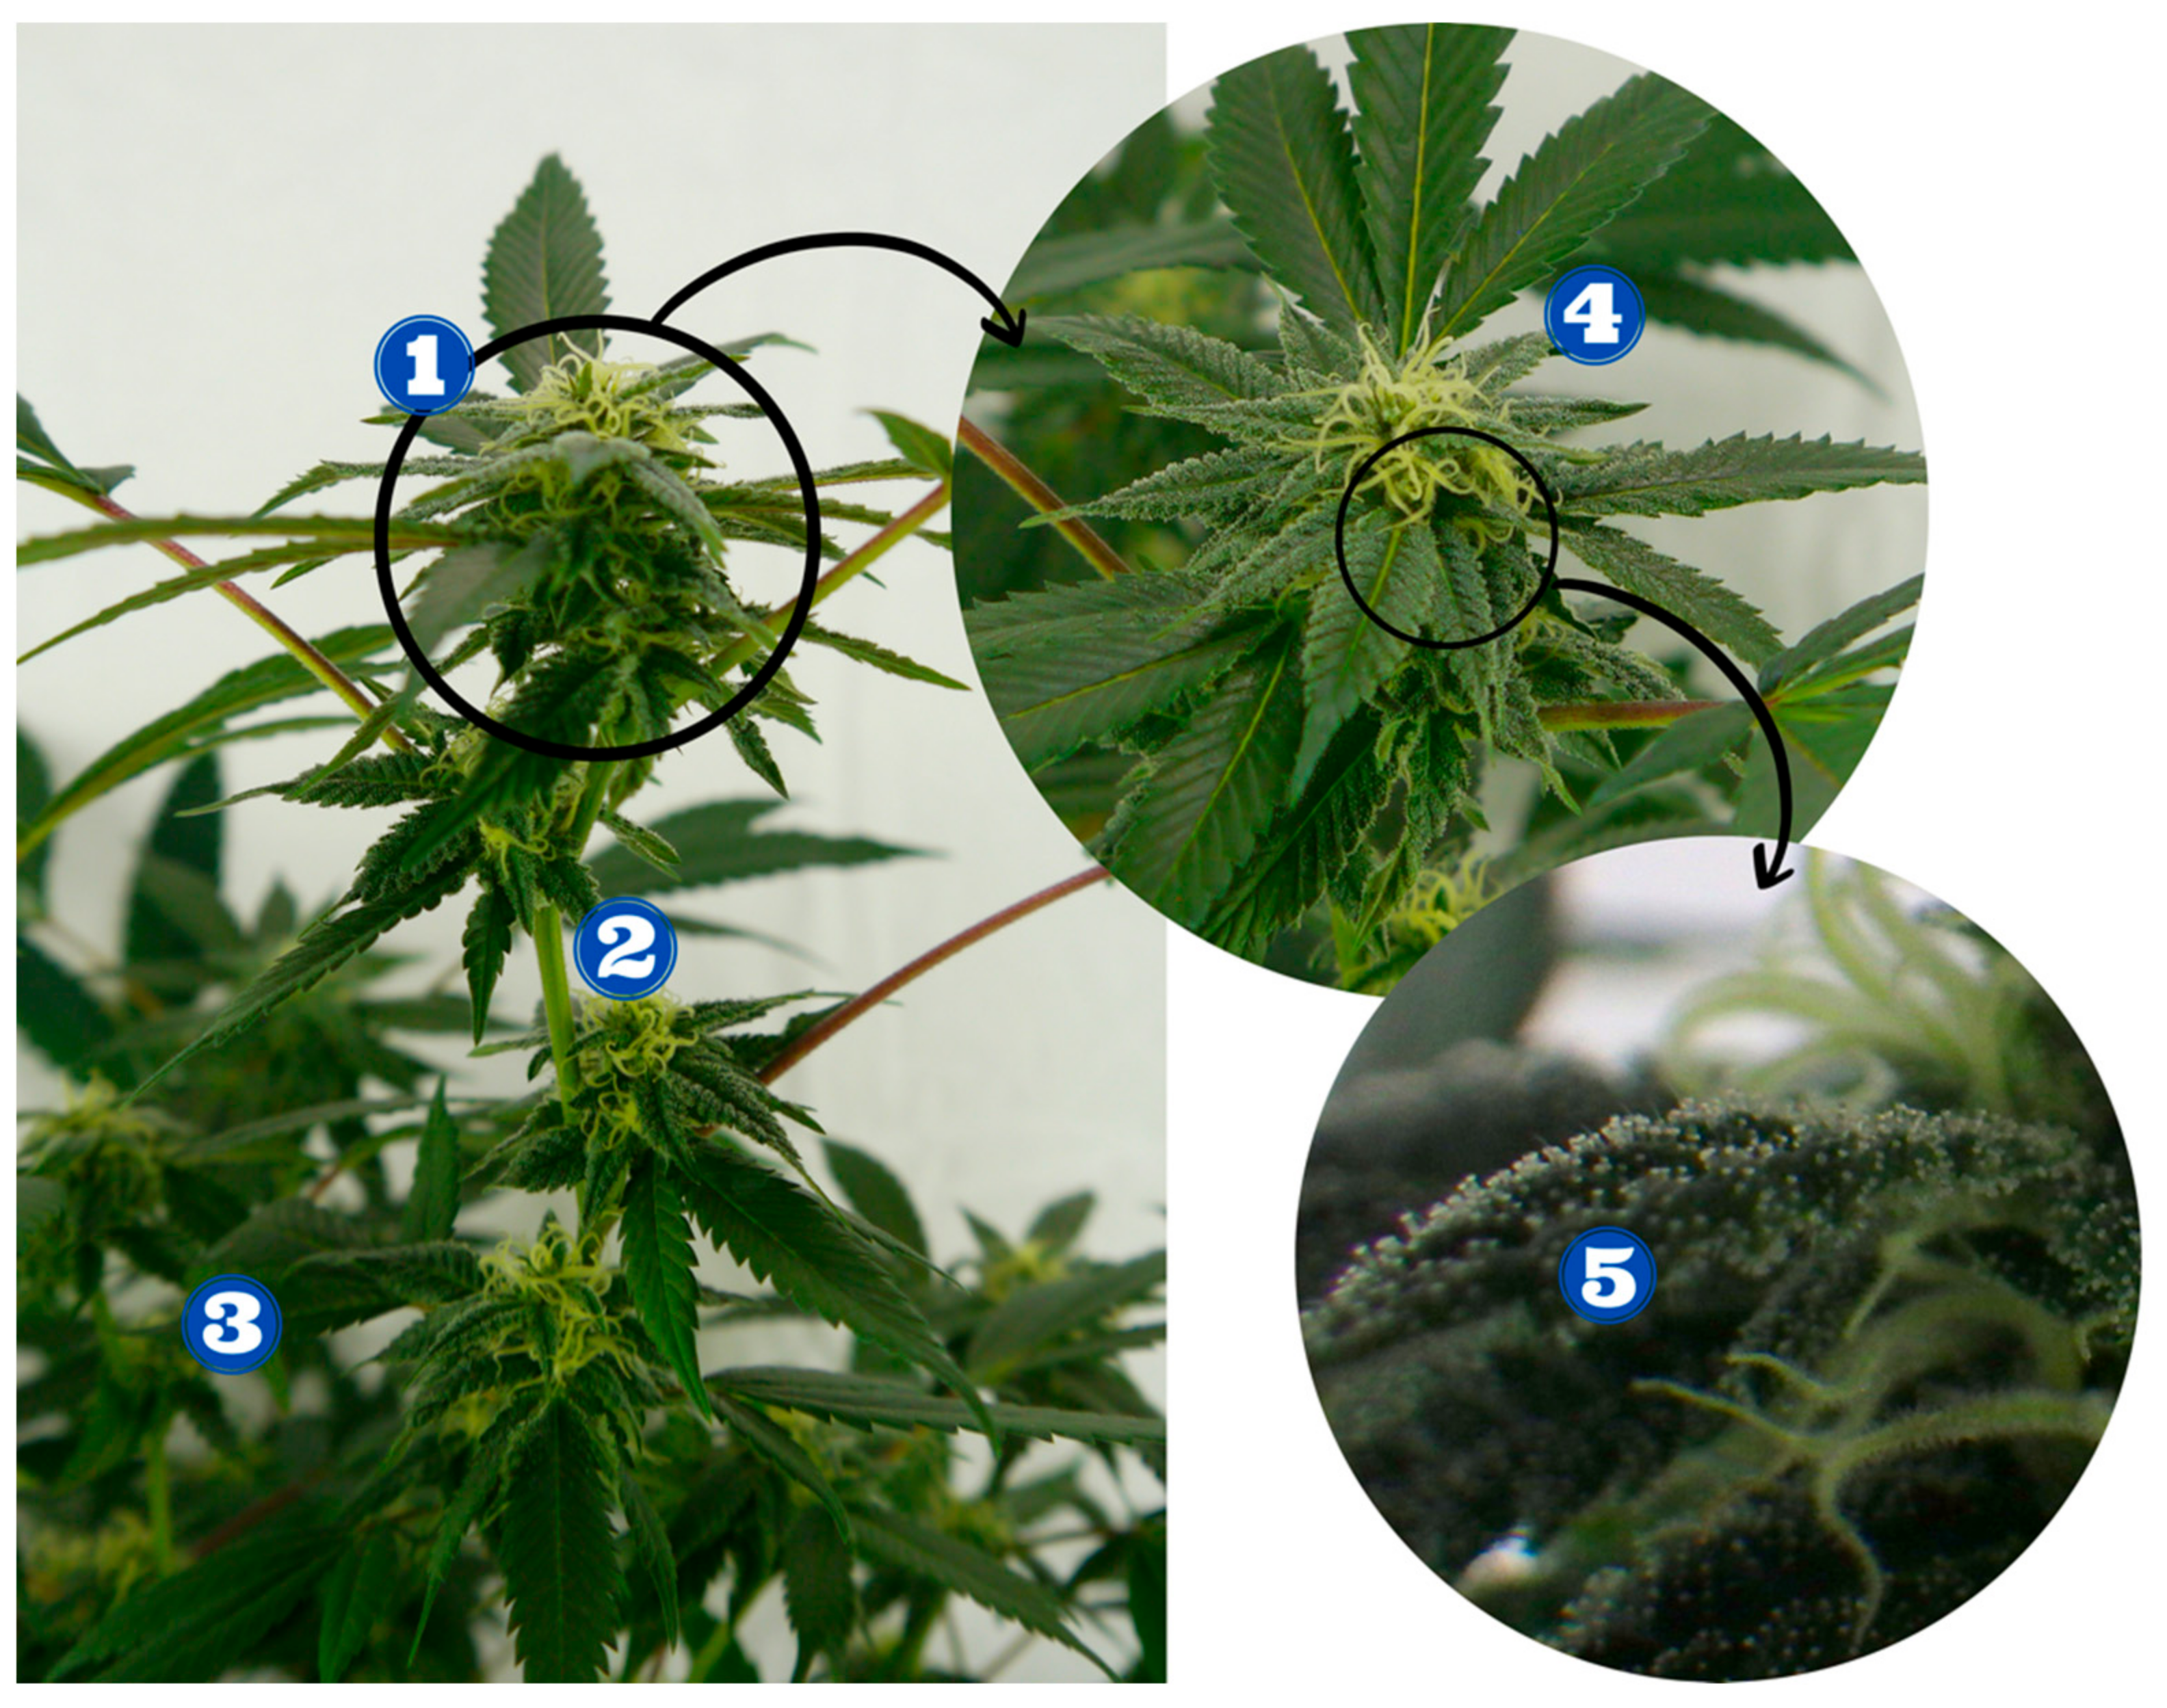 Bioengineering | Free Full-Text | Postharvest Operations of Cannabis and  Their Effect on Cannabinoid Content: A Review